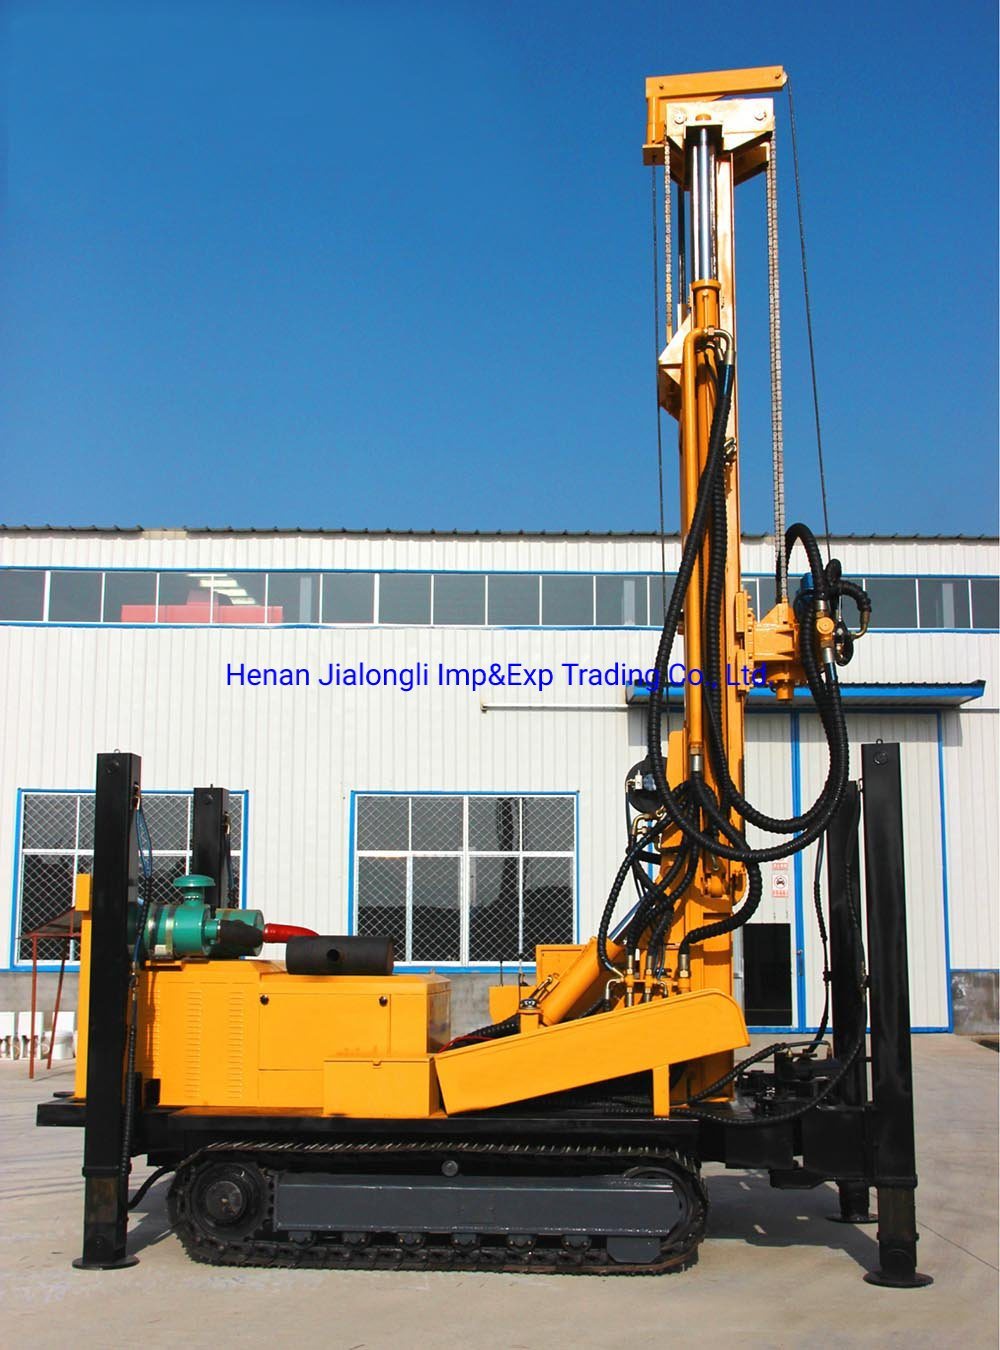 Kw400 Hydraulic Drive Portable Water Well Drilling Rig Machine Price